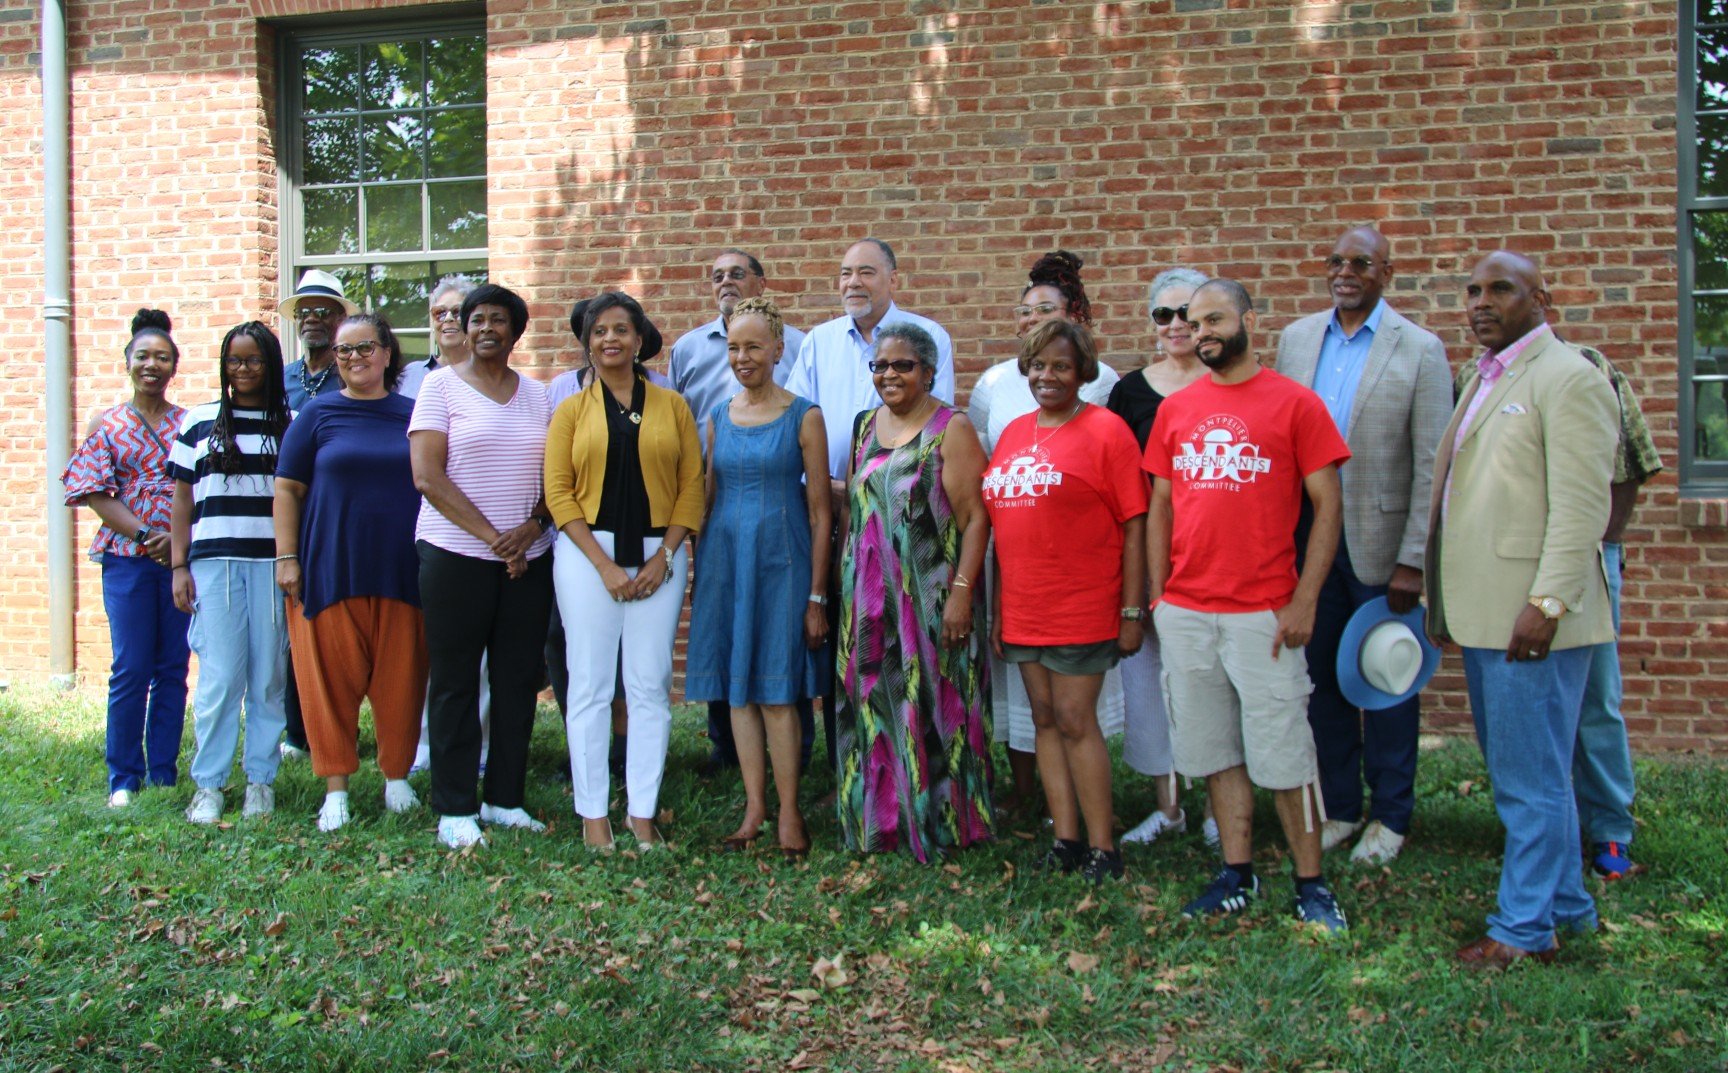  Descendants of the enslaved community stand together for a group picture outside of Montpelier’s visitor center Aug. 5. (Photo Credit: Andra Landi) 